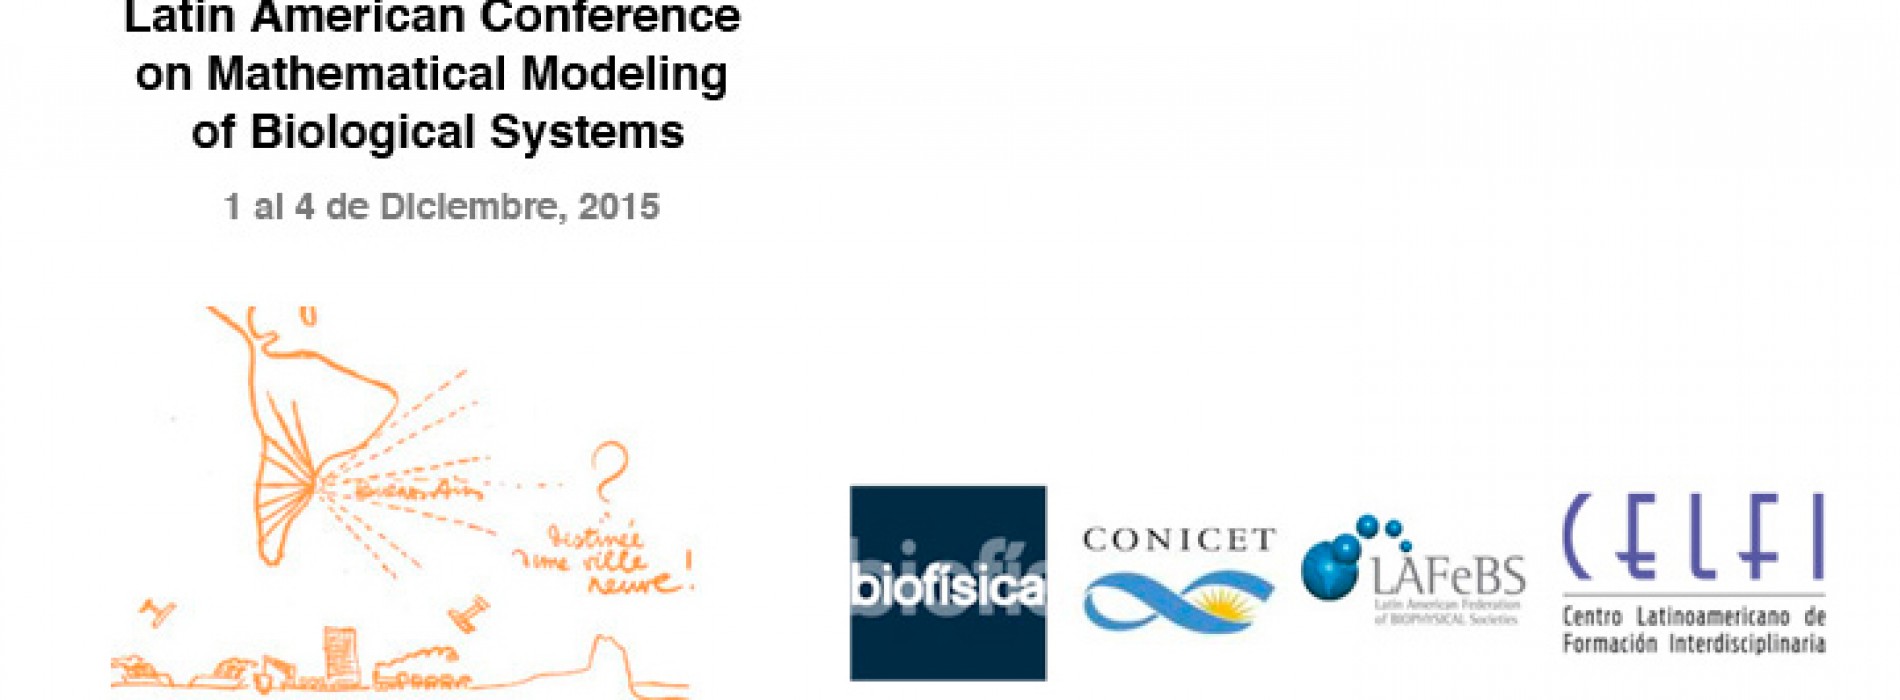 Latin American Conference on Mathematical Modeling of Biological Systems